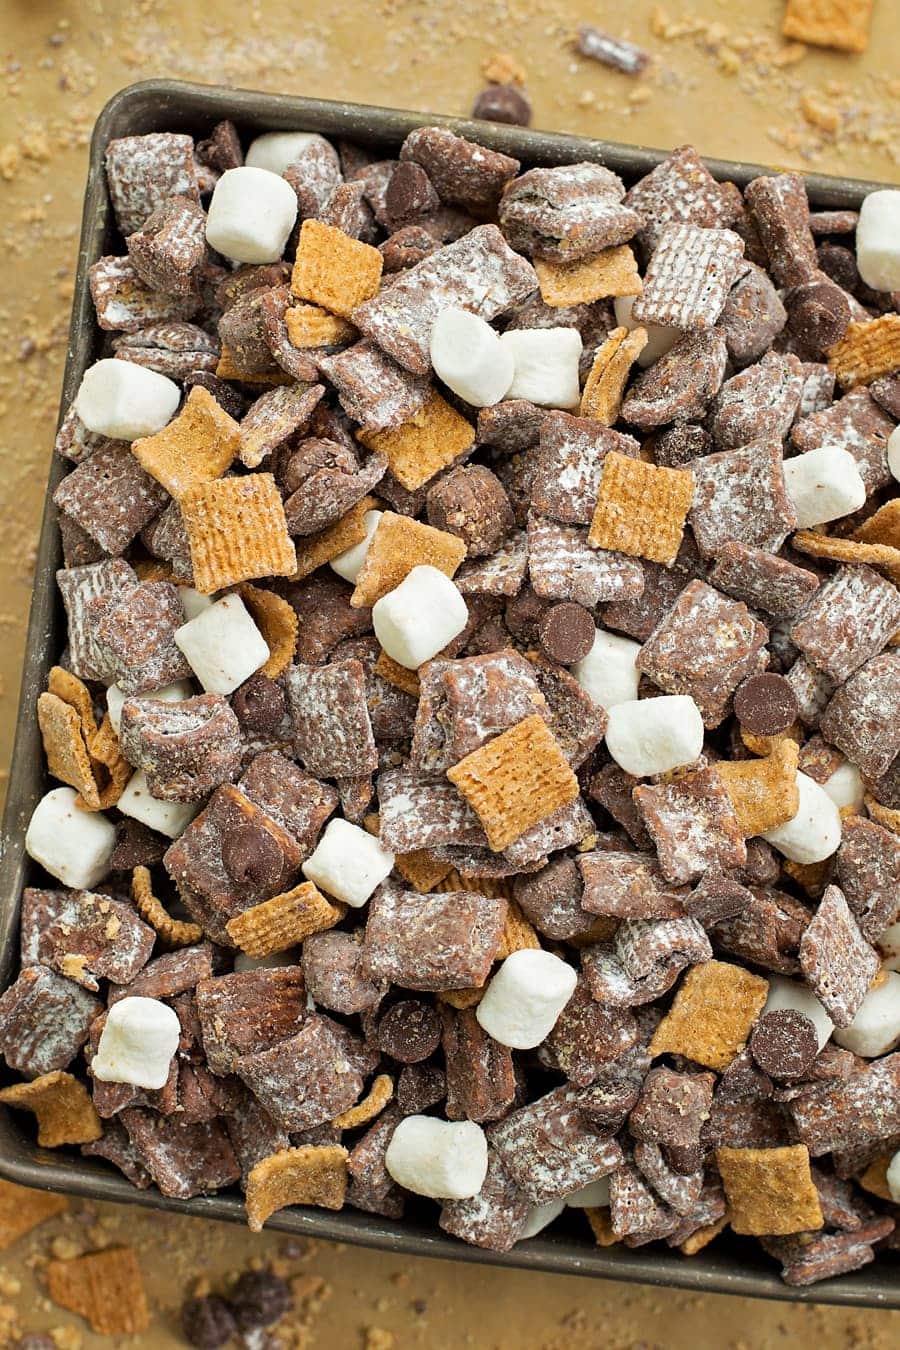 Mix of marshmallows, grahams, chocolate chips, and chex.